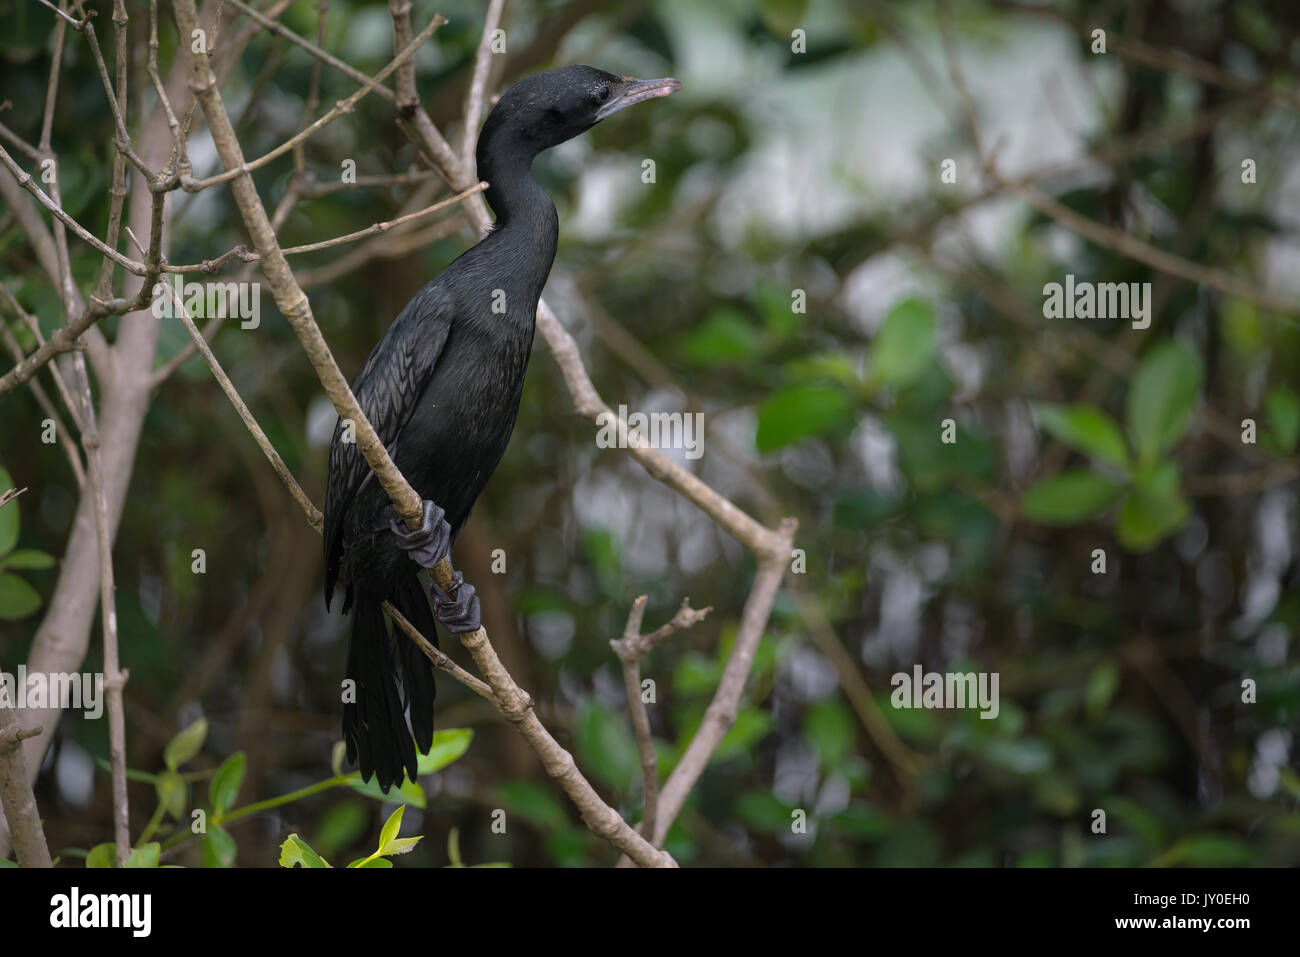 A little cormorant perched on a tree Stock Photo